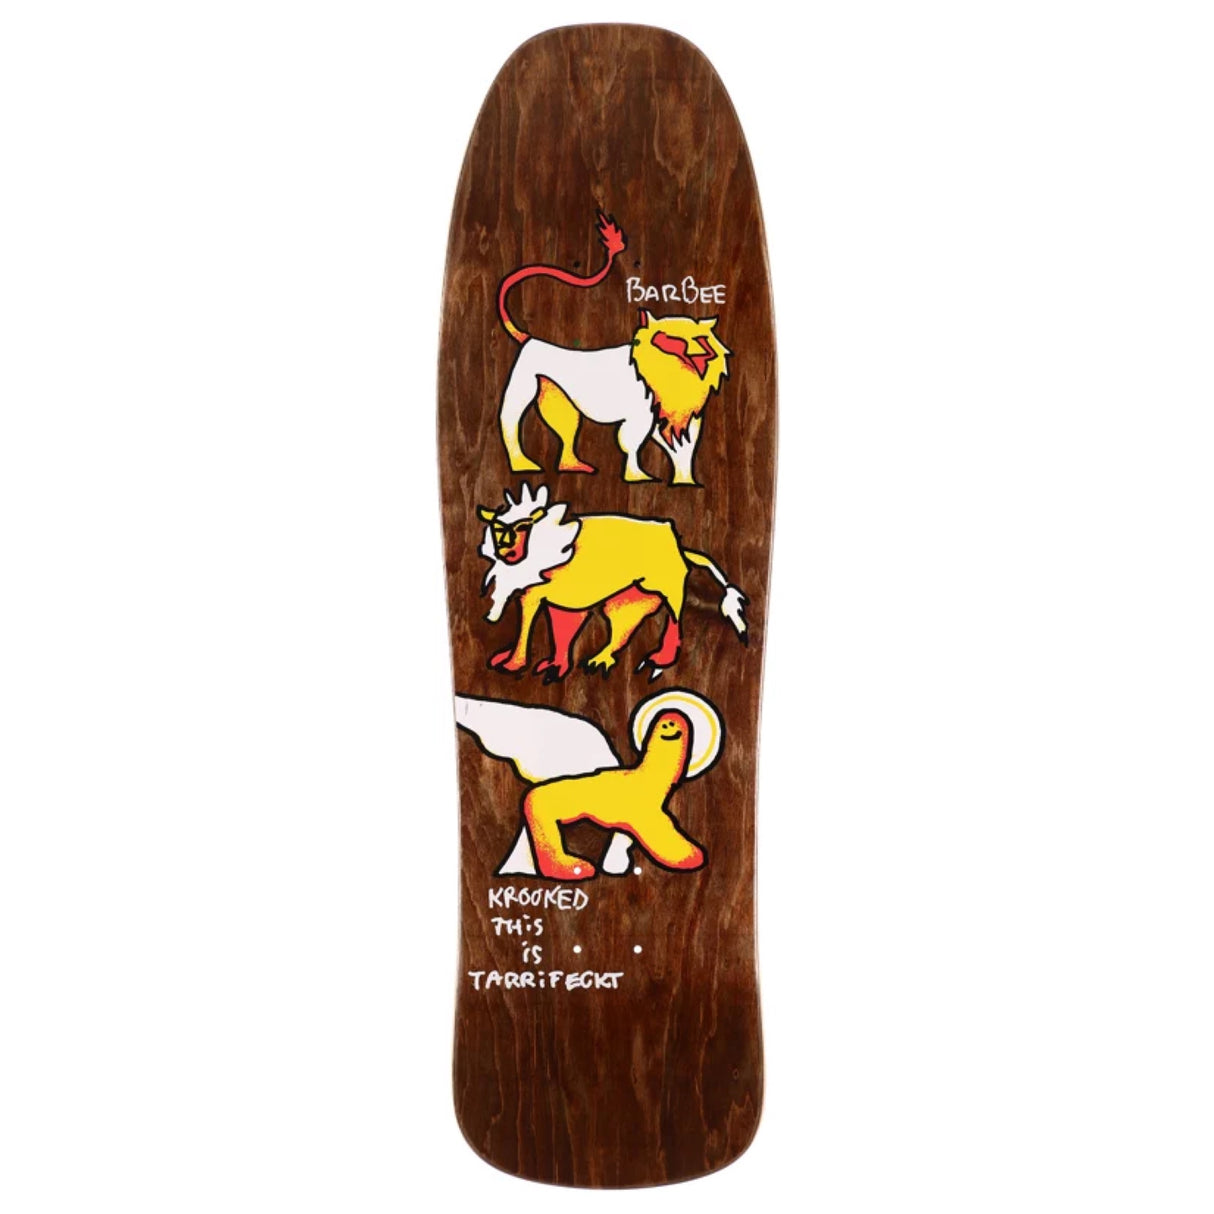 Krooked Barbee Pride 9.5" Assorted Stain Shaped Skateboard Deck